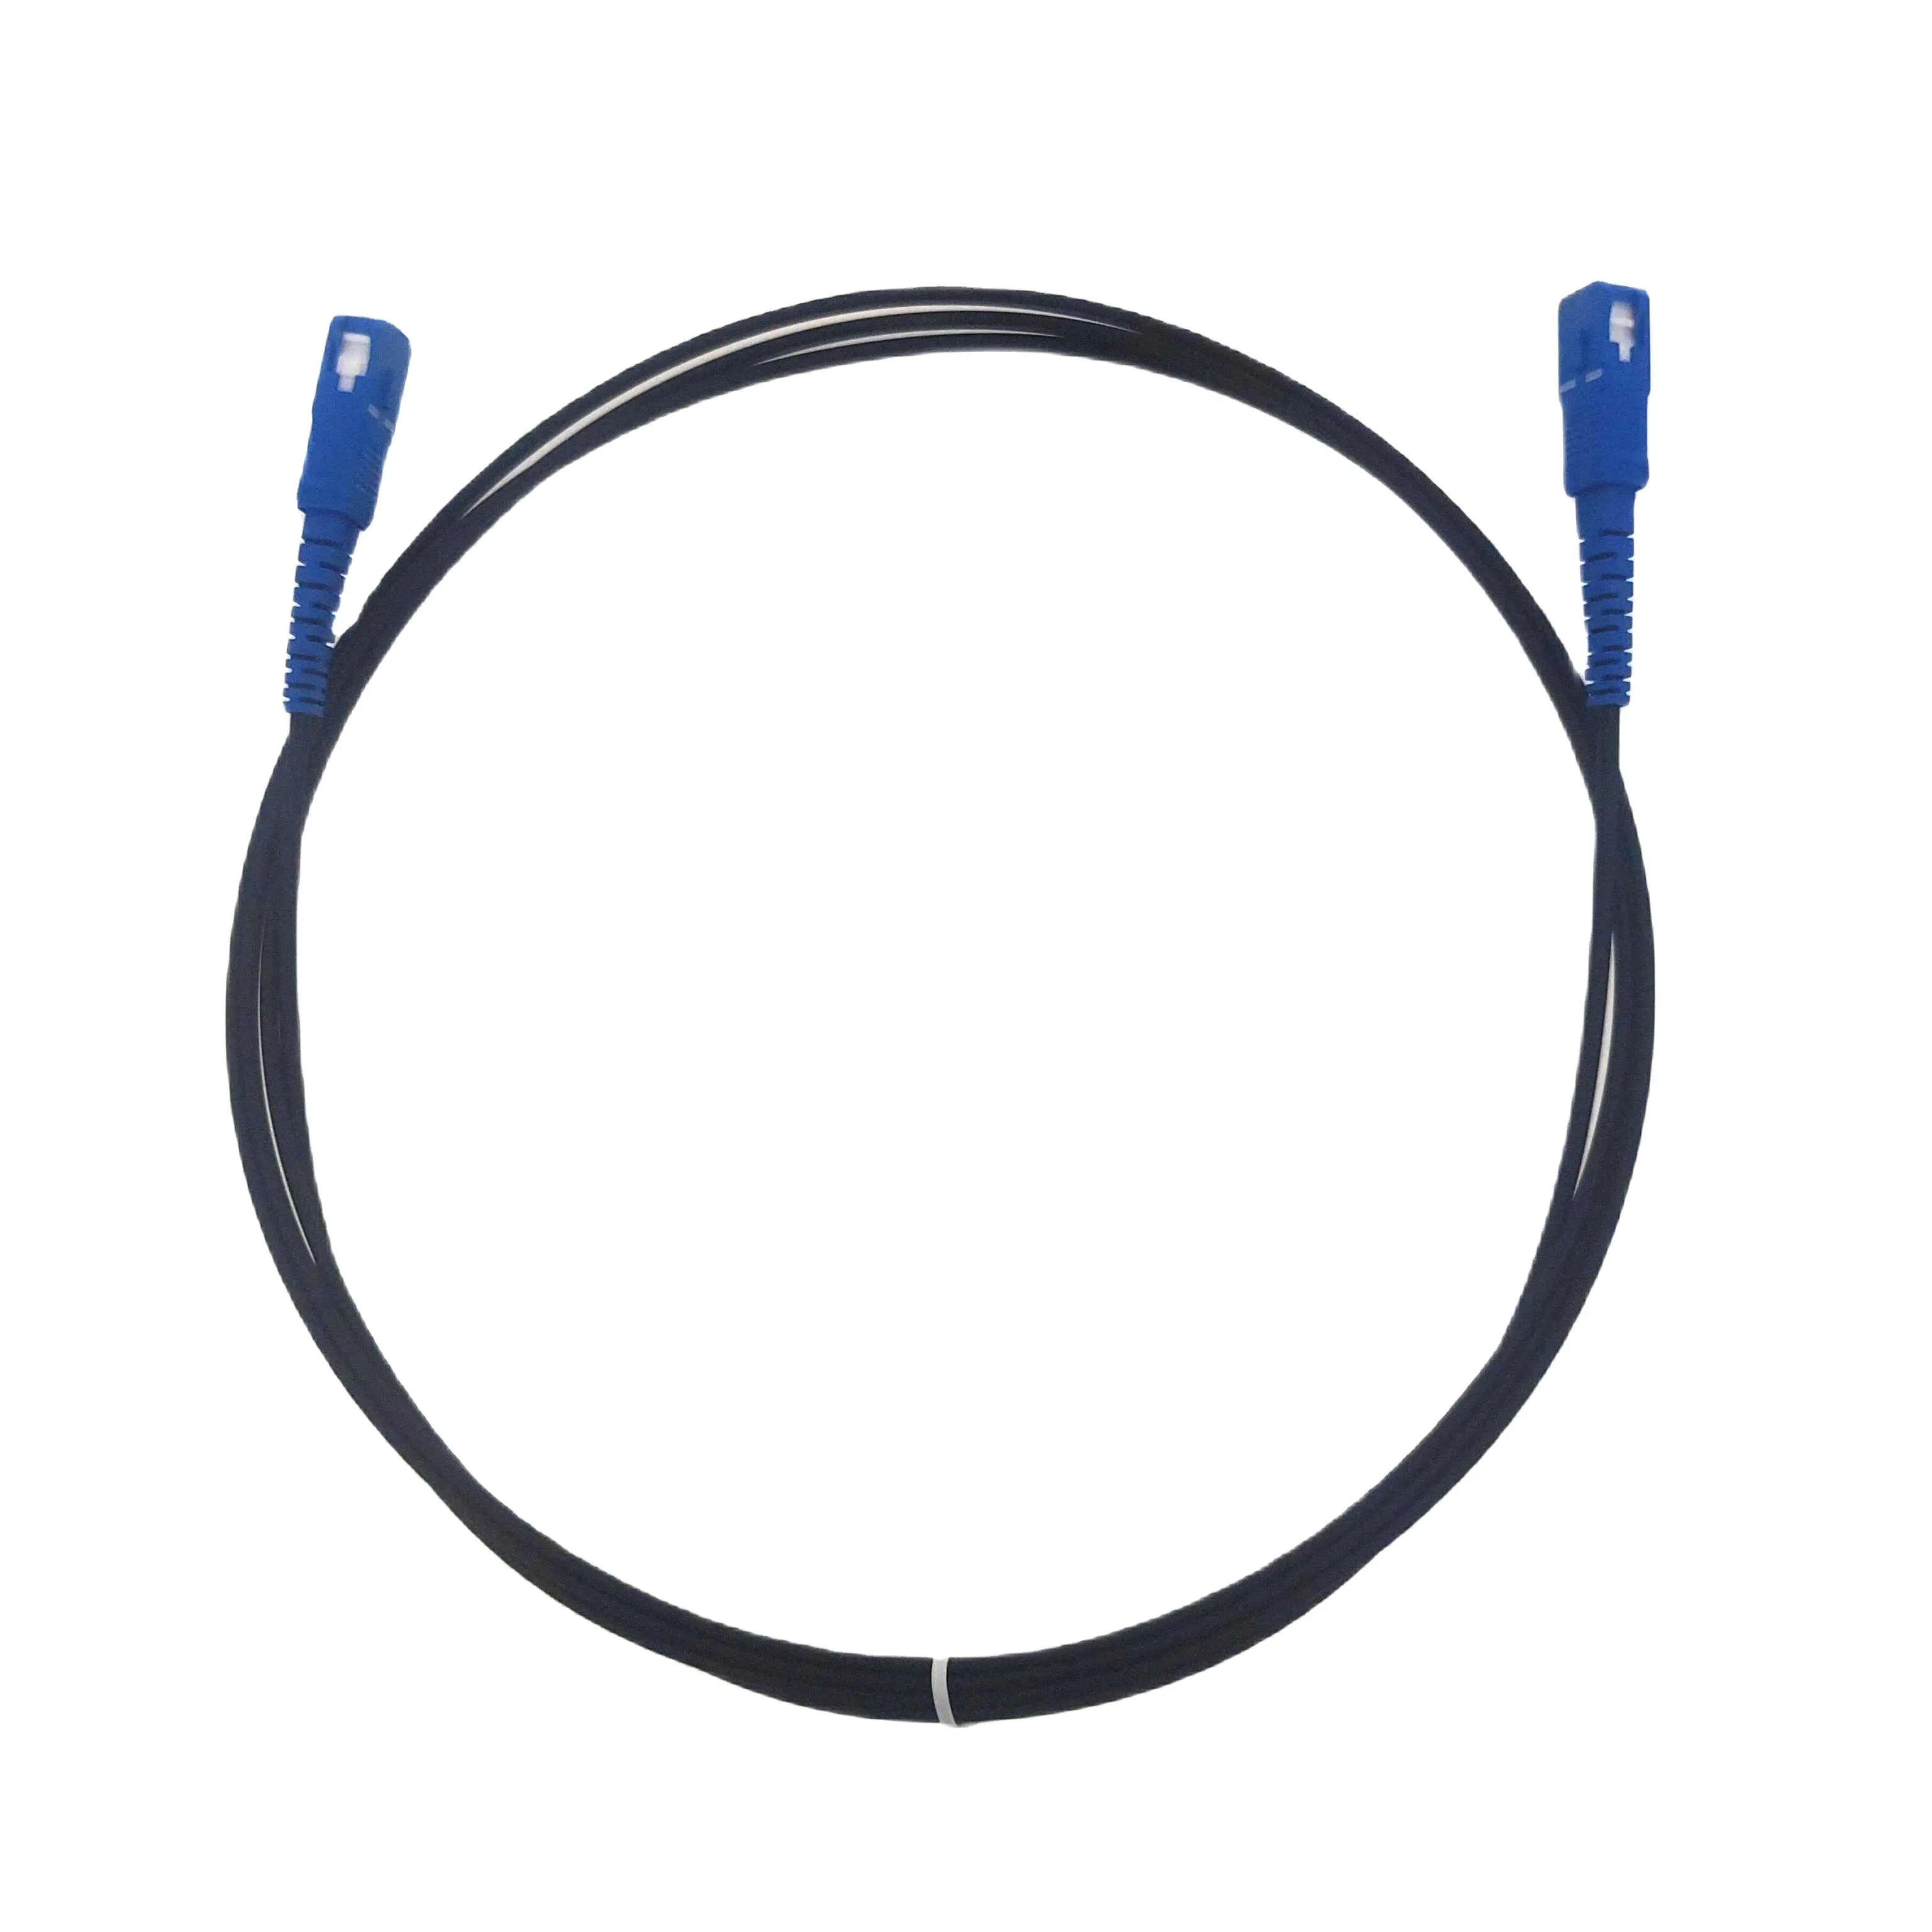 Indoor Outdoor Ftth Flat Drop Cable G657a2 Single Mode With Connector Fiber Optic Sc Apc/upc Patch Cord Optical Cable